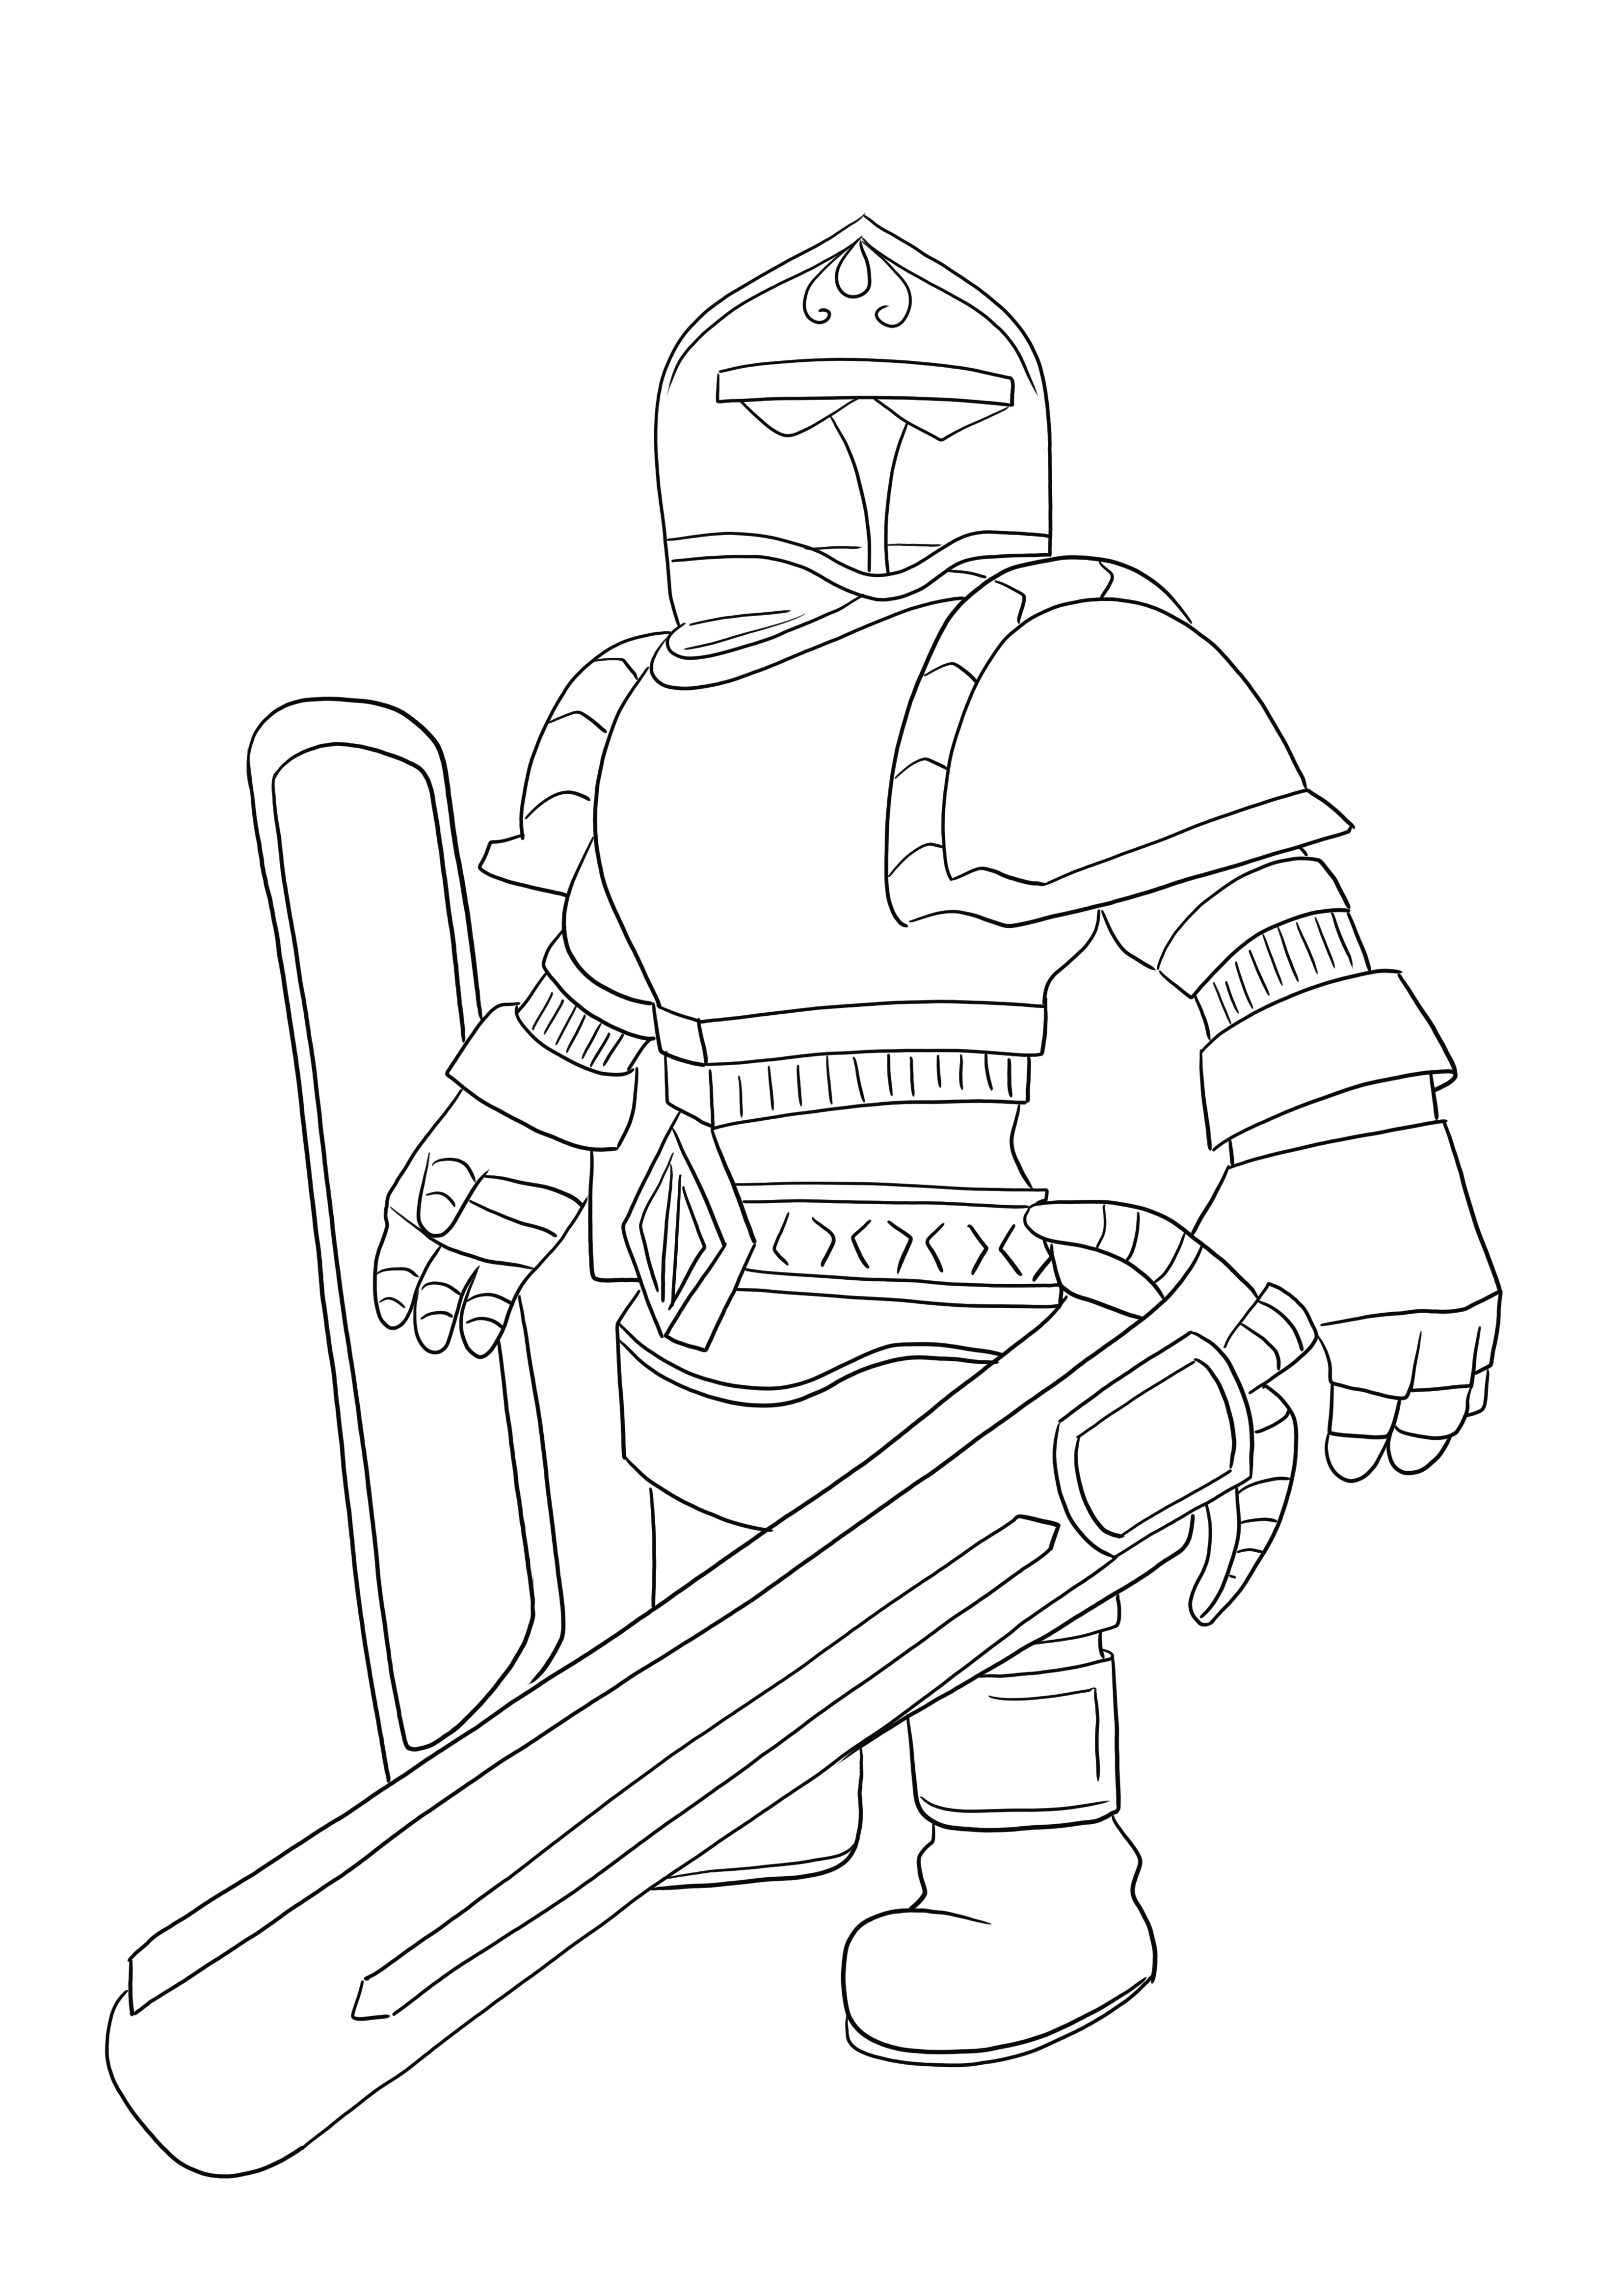 Easy to print our free coloring image of the Roblox Knight from the ...